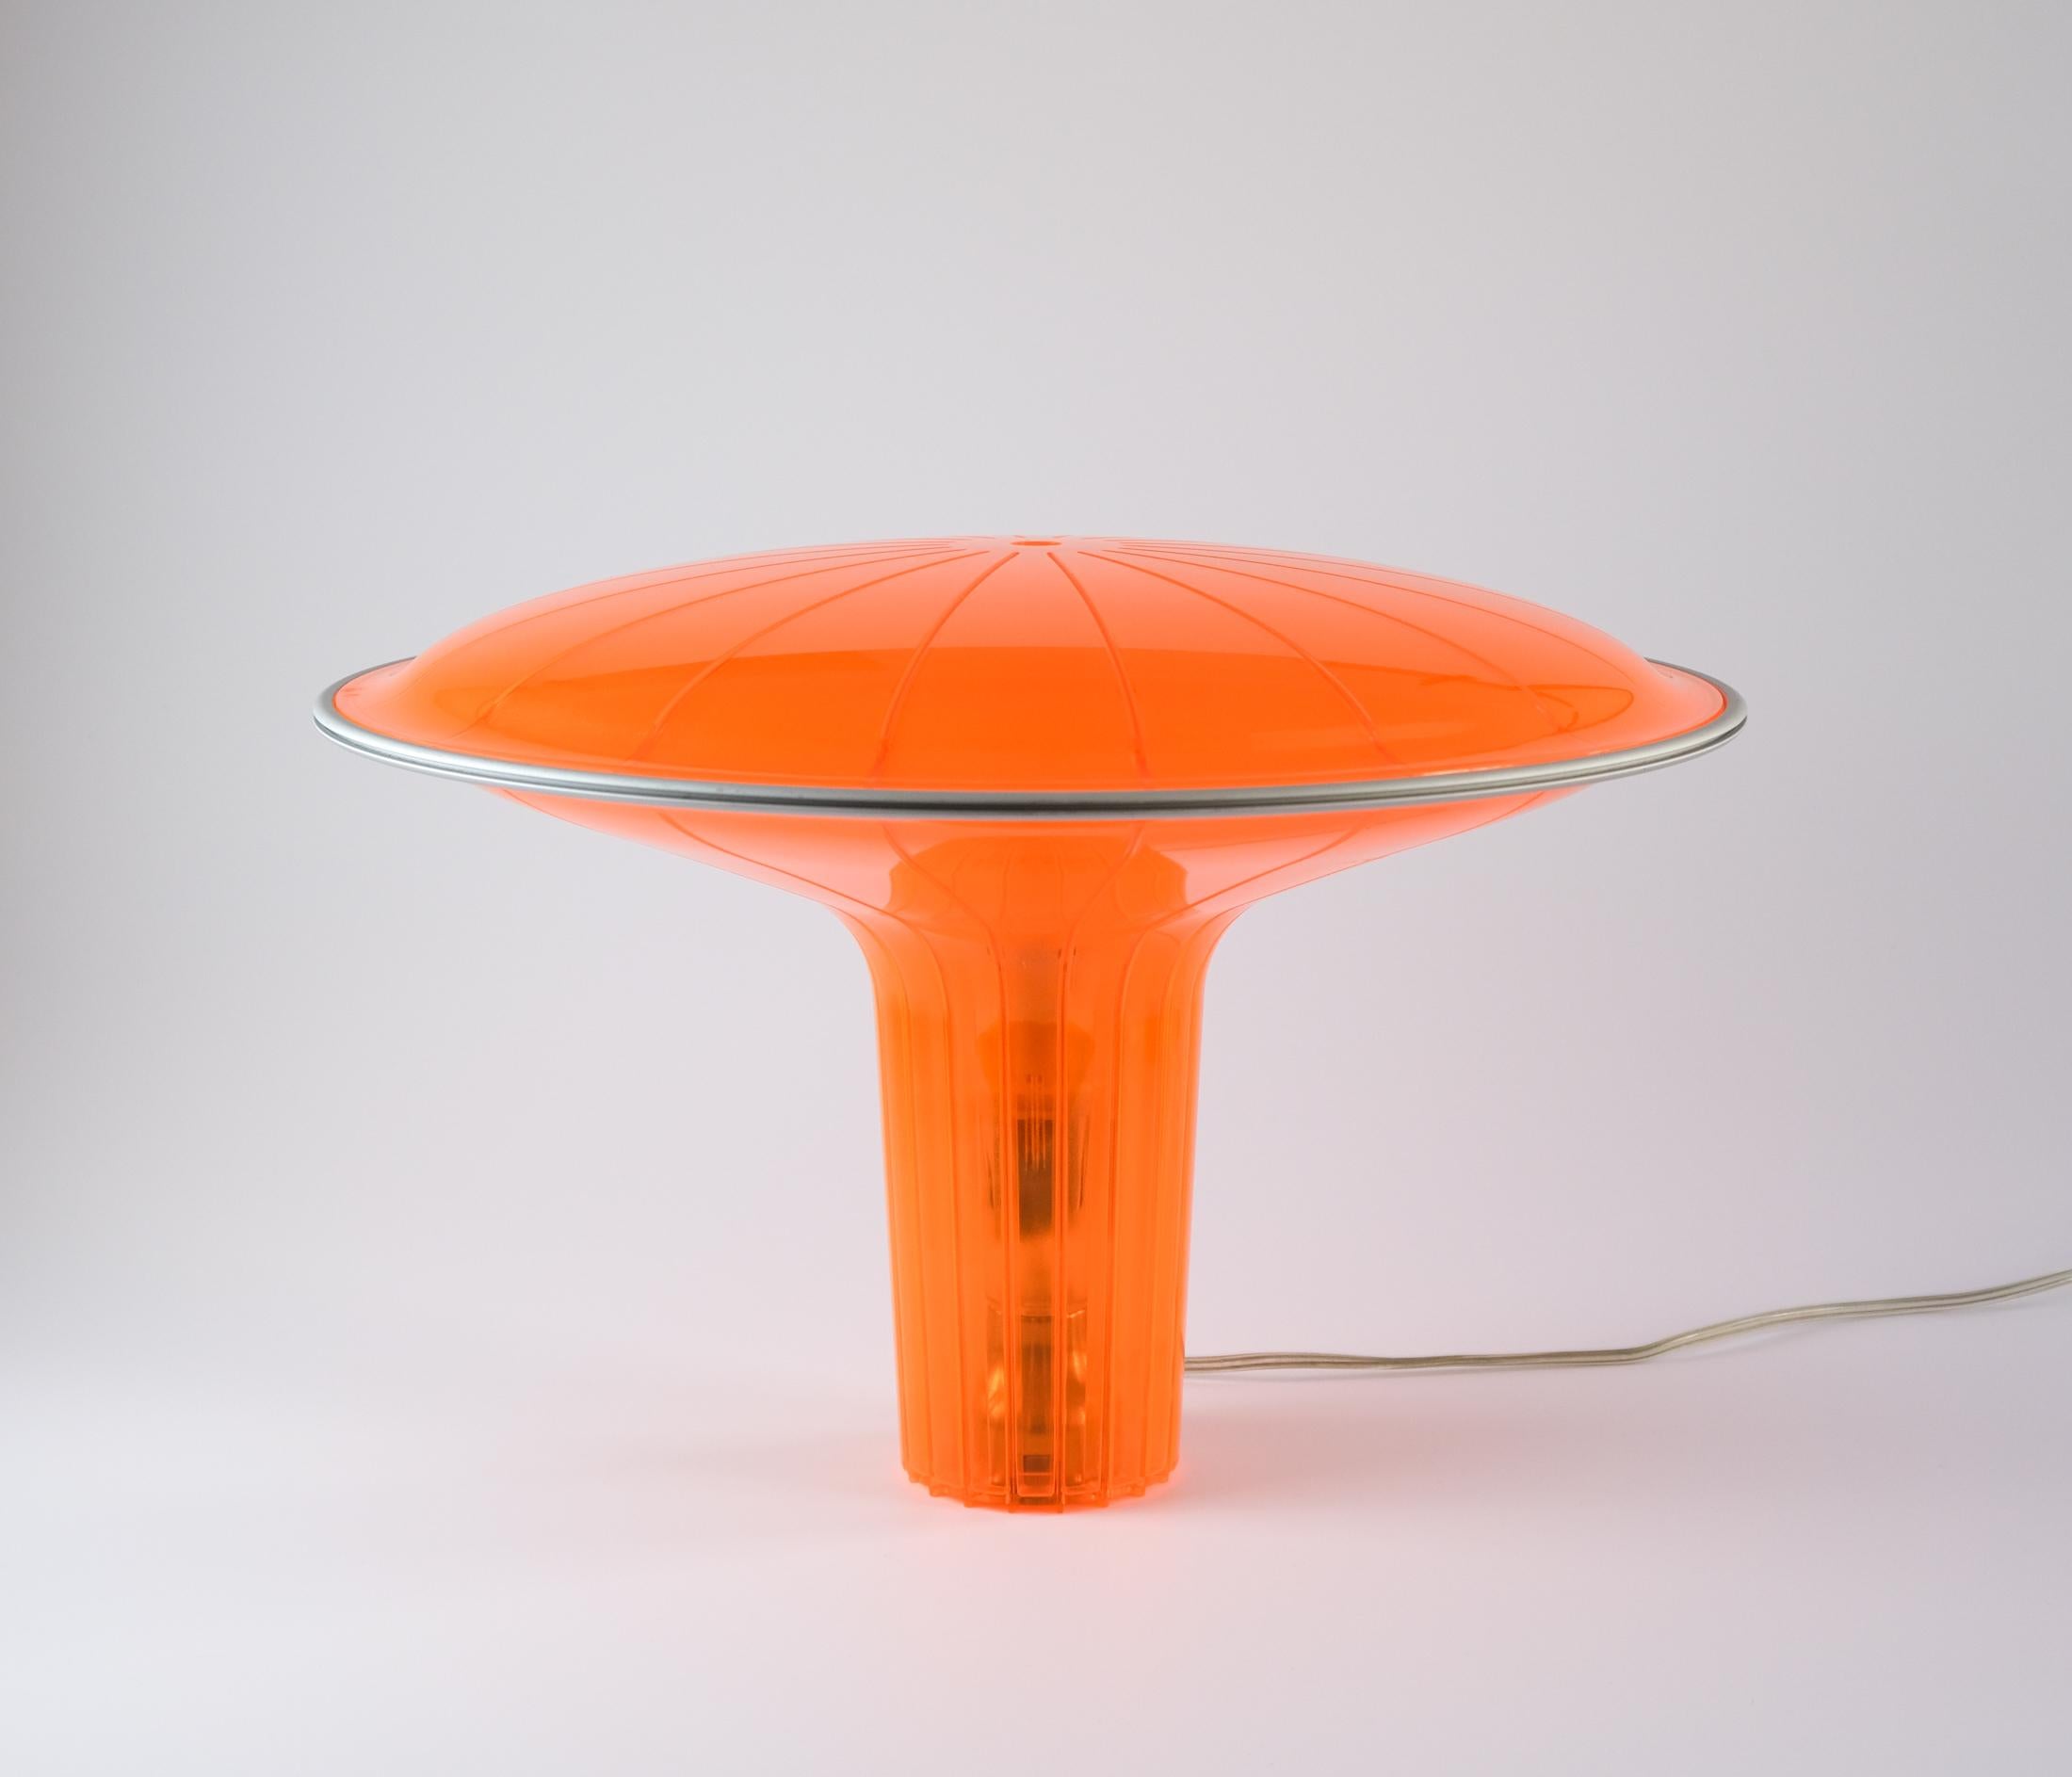 For sale is an iconic orange D36 “Agaricon” table lamp, designed by Ross Lovegrove in 1999 for LucePlan of Italy.

Light and semi-transparent, the Agaricon (Greek for mushroom) is switched on and off by touching an aluminium sensor ring that runs